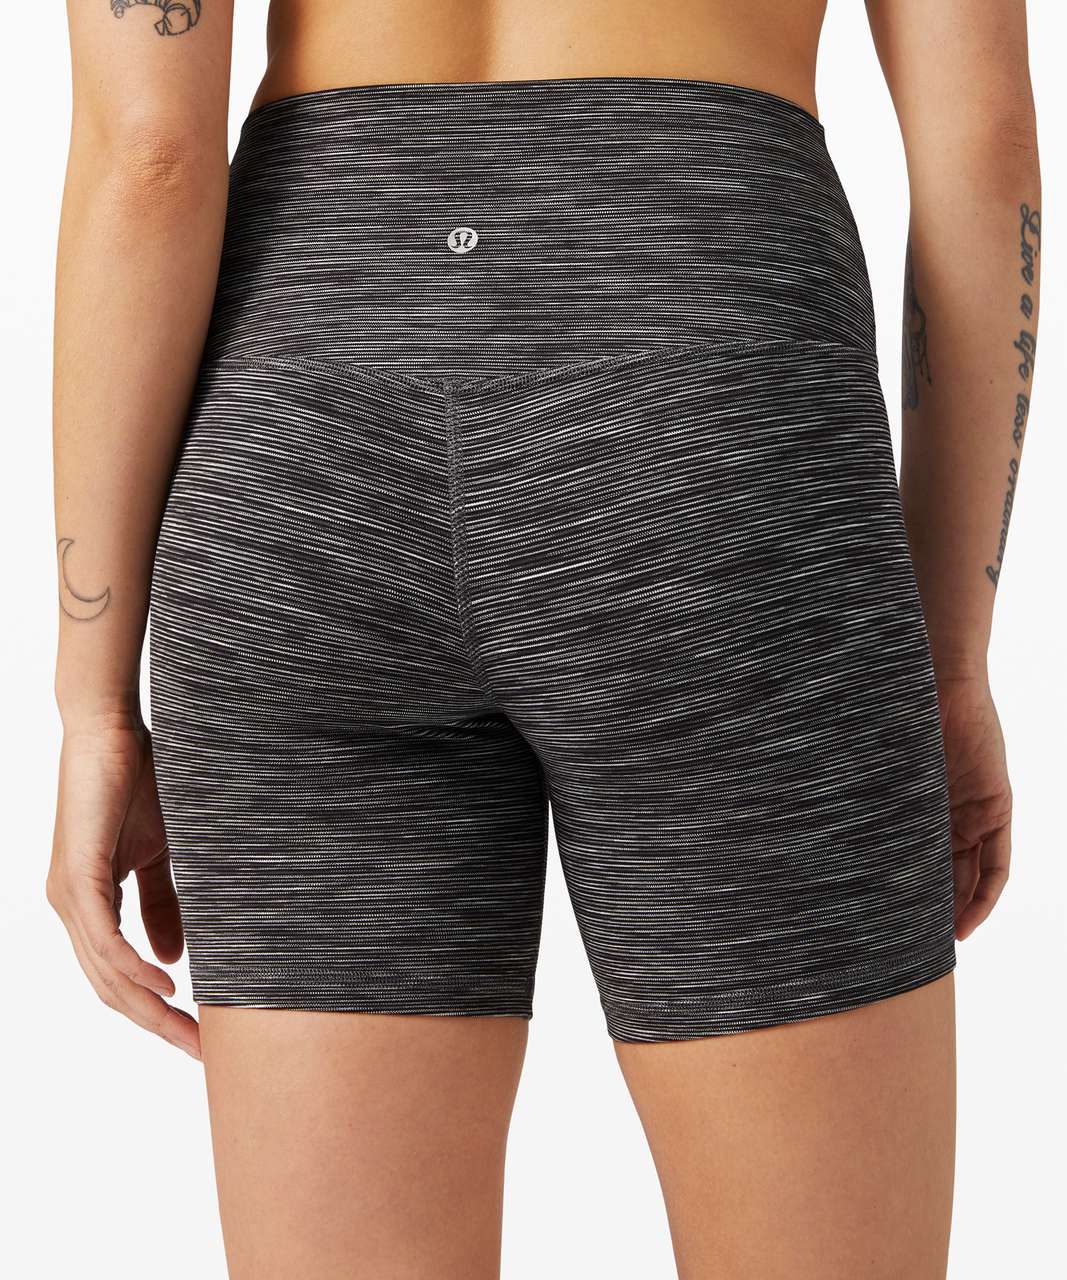 Lululemon Align™ Short *6" - Wee Are From Space Dark Carbon Ice Grey